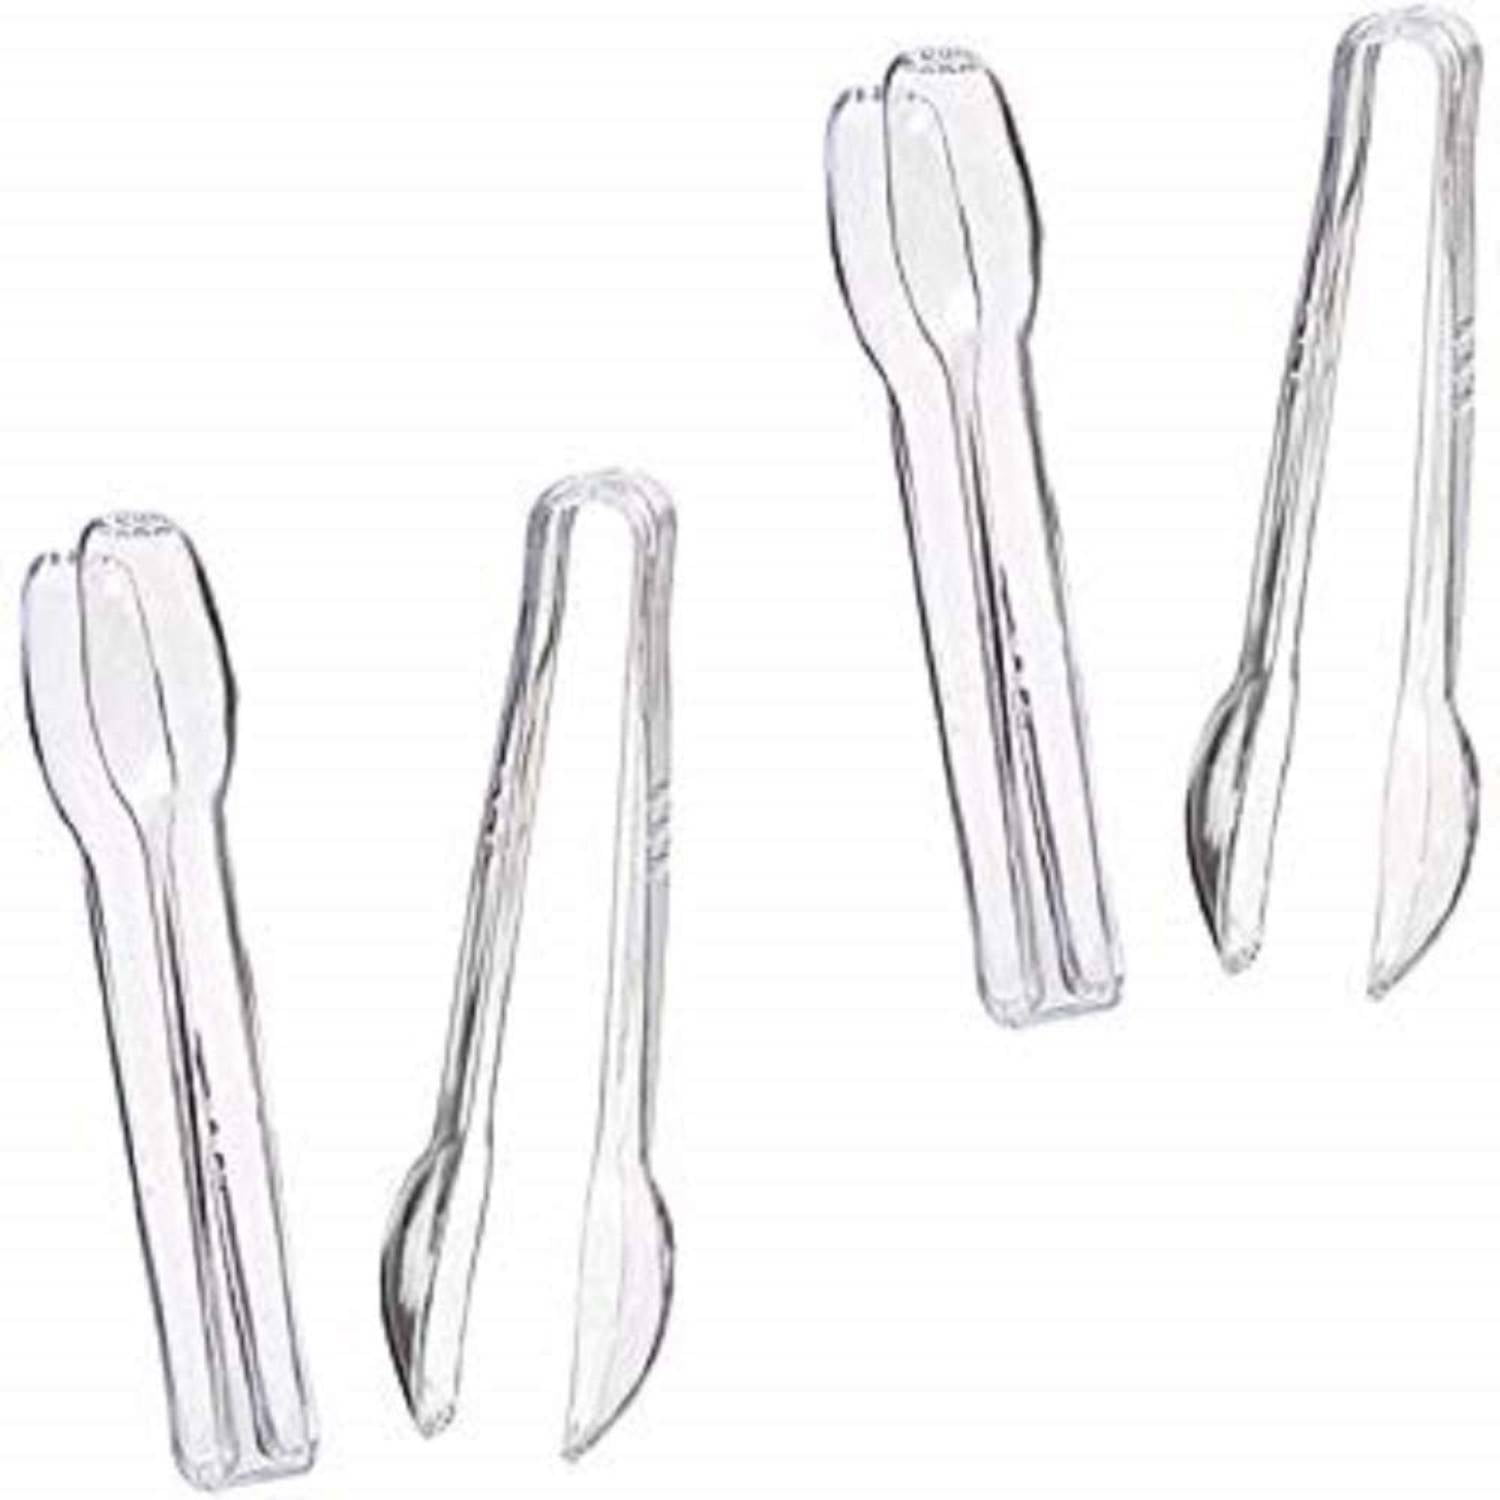 EcoQuality Disposable Clear Plastic Buffet Serving Tongs 7 inch, Serving Utensil Tongs, Appetizer Tongs, Heavy Duty Clear Kitchen Tongs, Small Ice Tongs